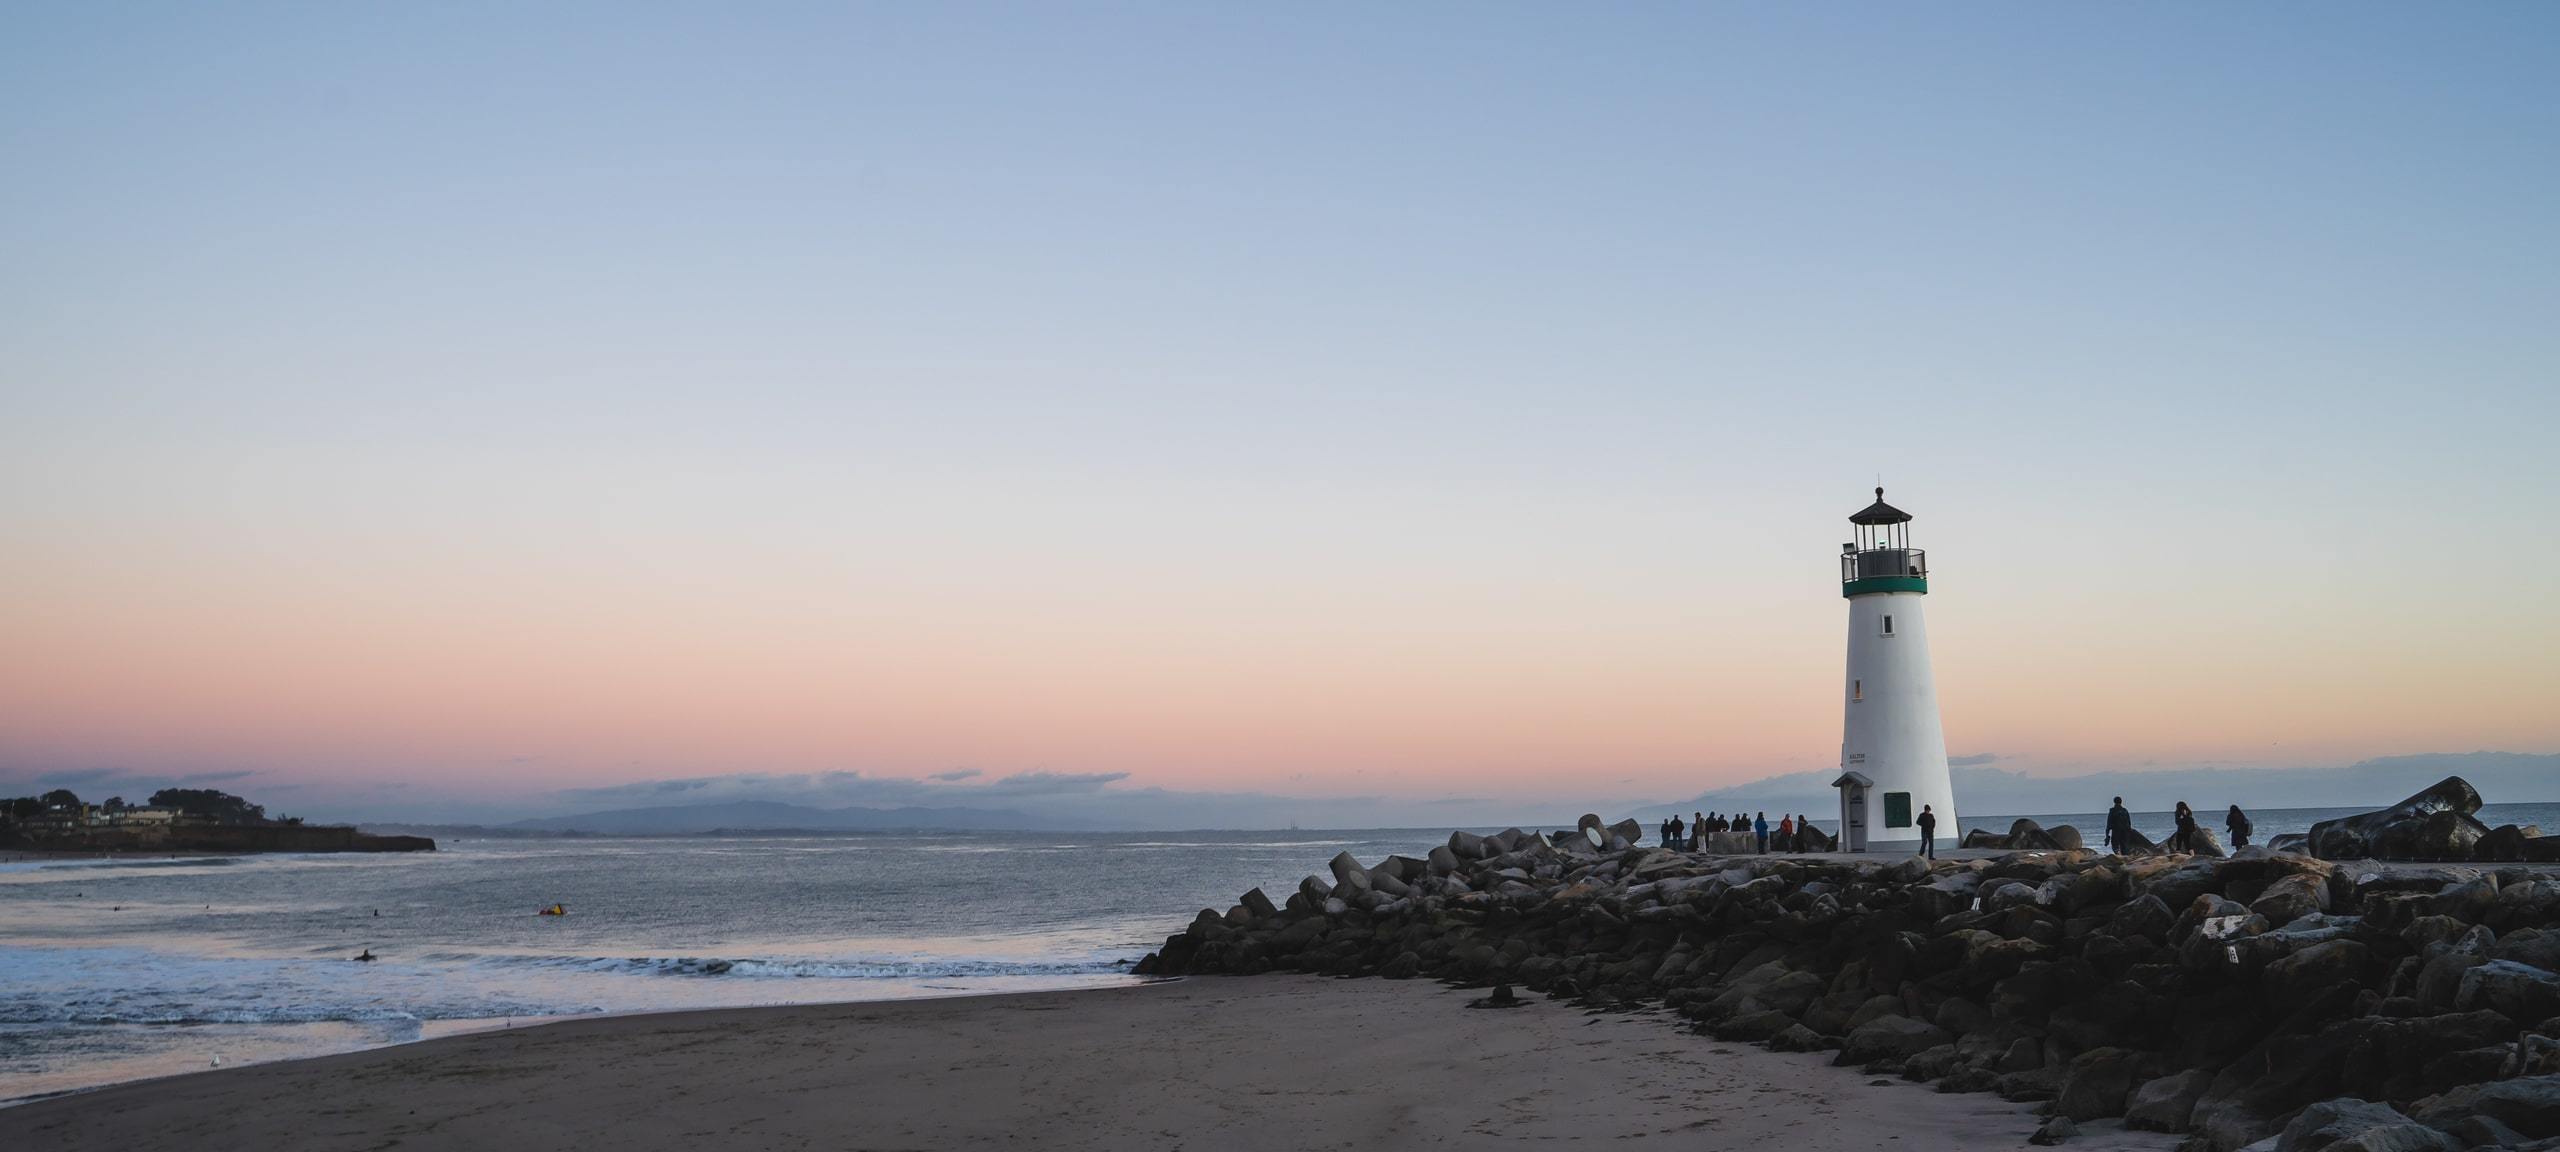 Sunrise on waterfront with lighthouse in Santa Cruz, CA